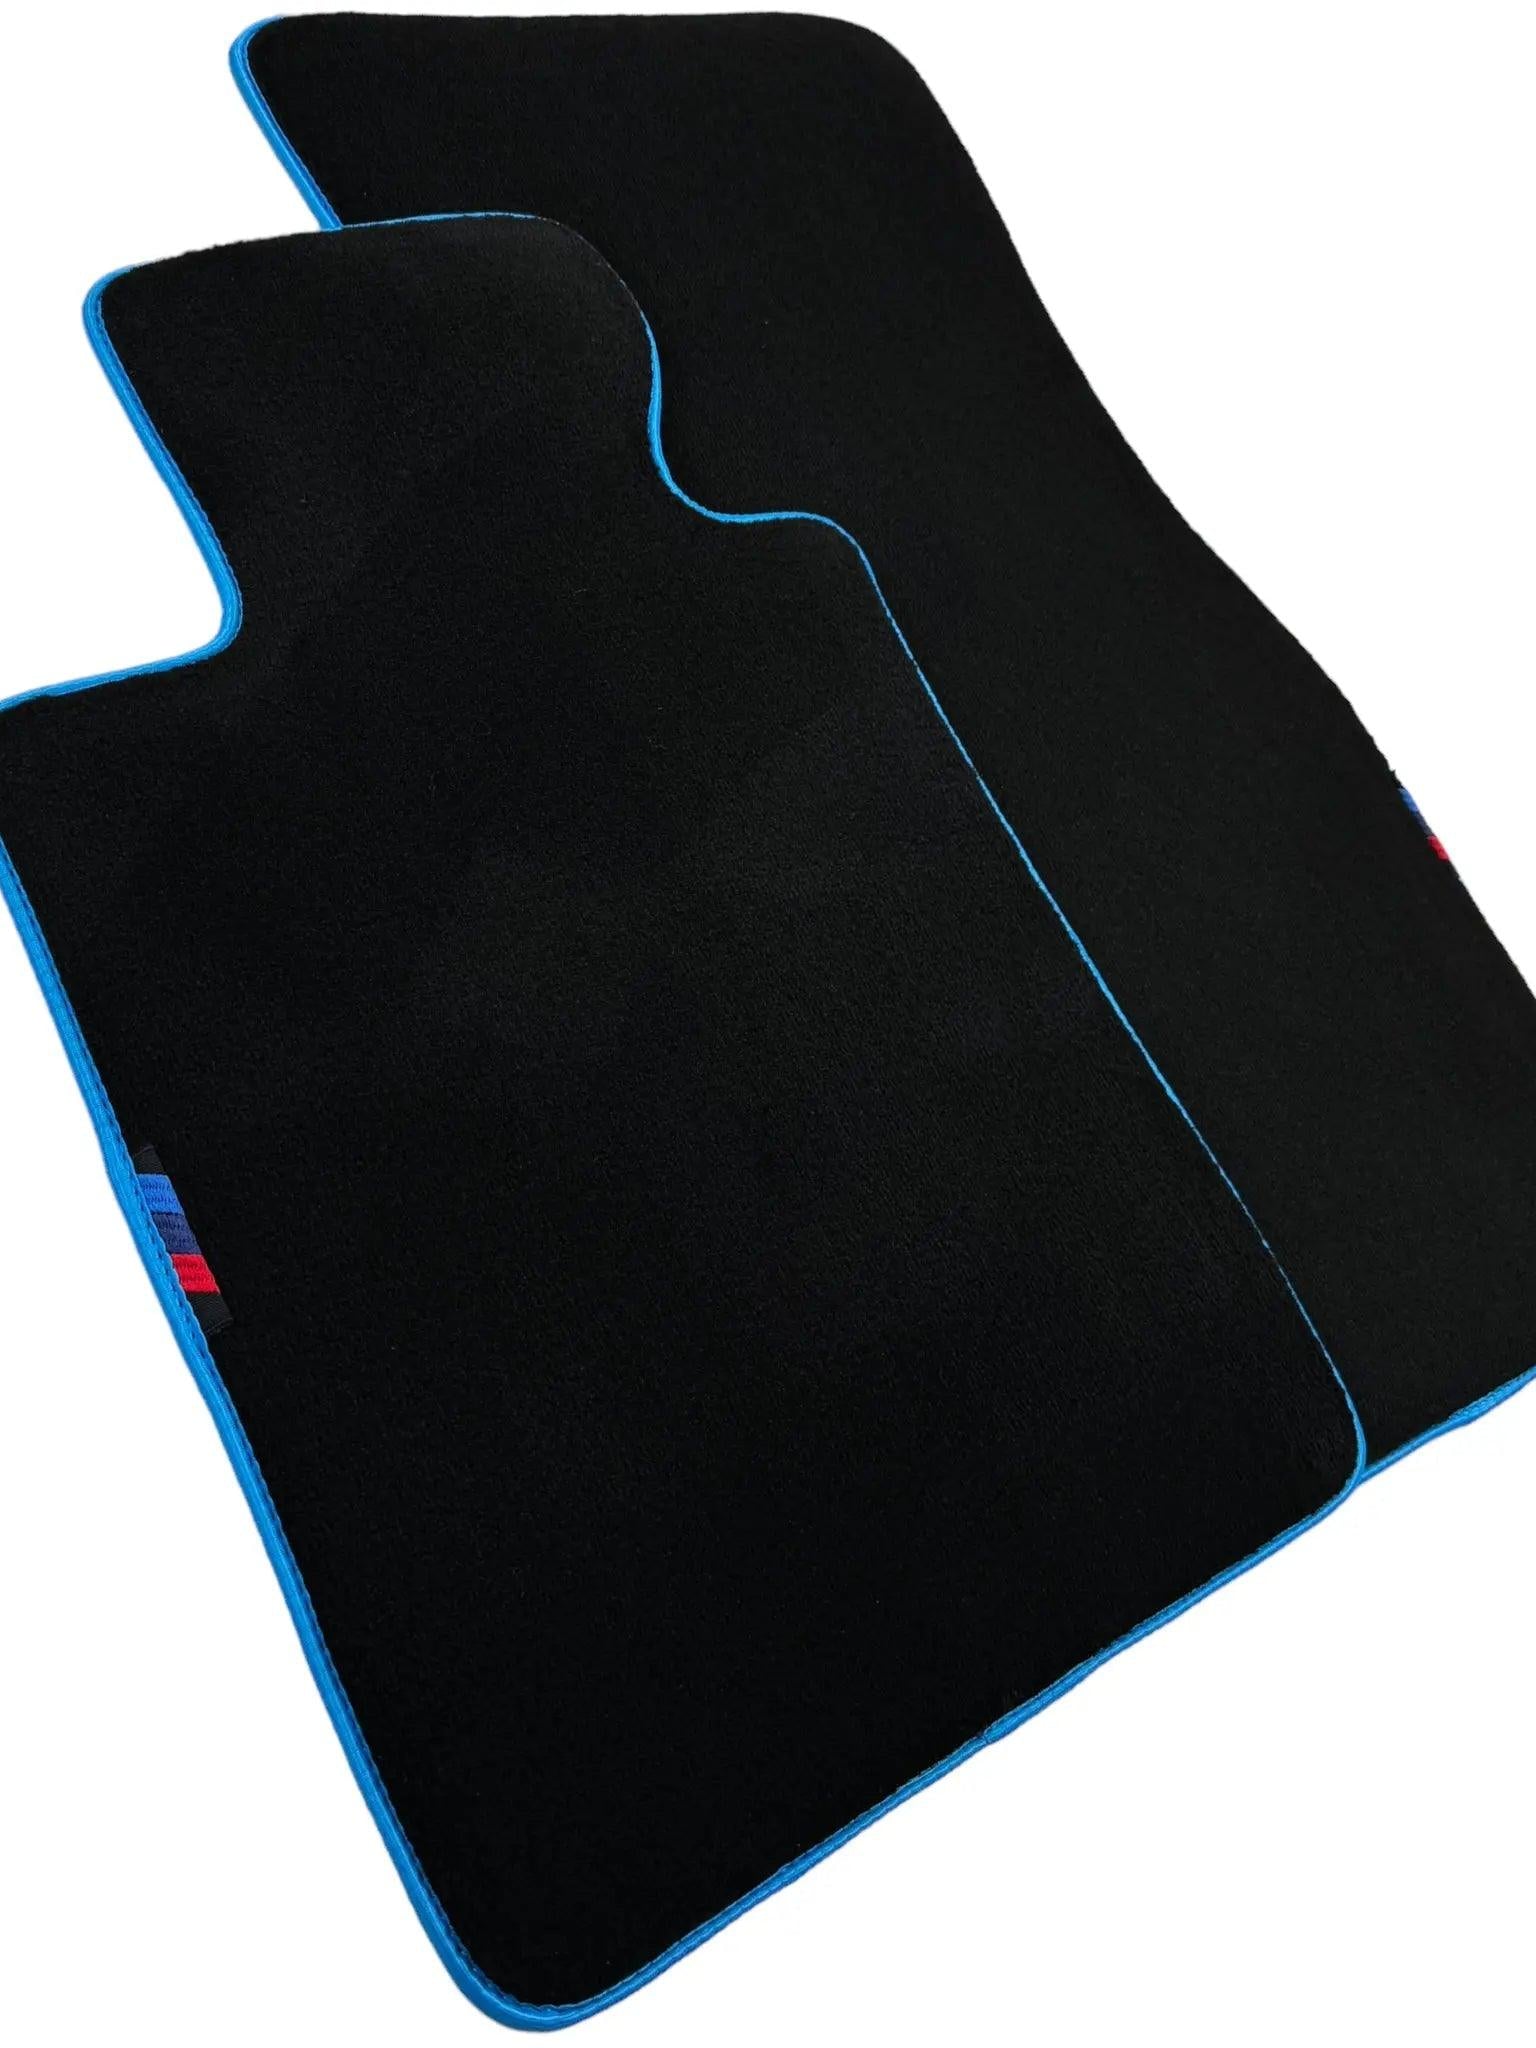 Black Floor Floor Mats For BMW 6 Series F06 Gran Coupe | Fighter Jet Edition AutoWin Brand |Sky Blue Trim